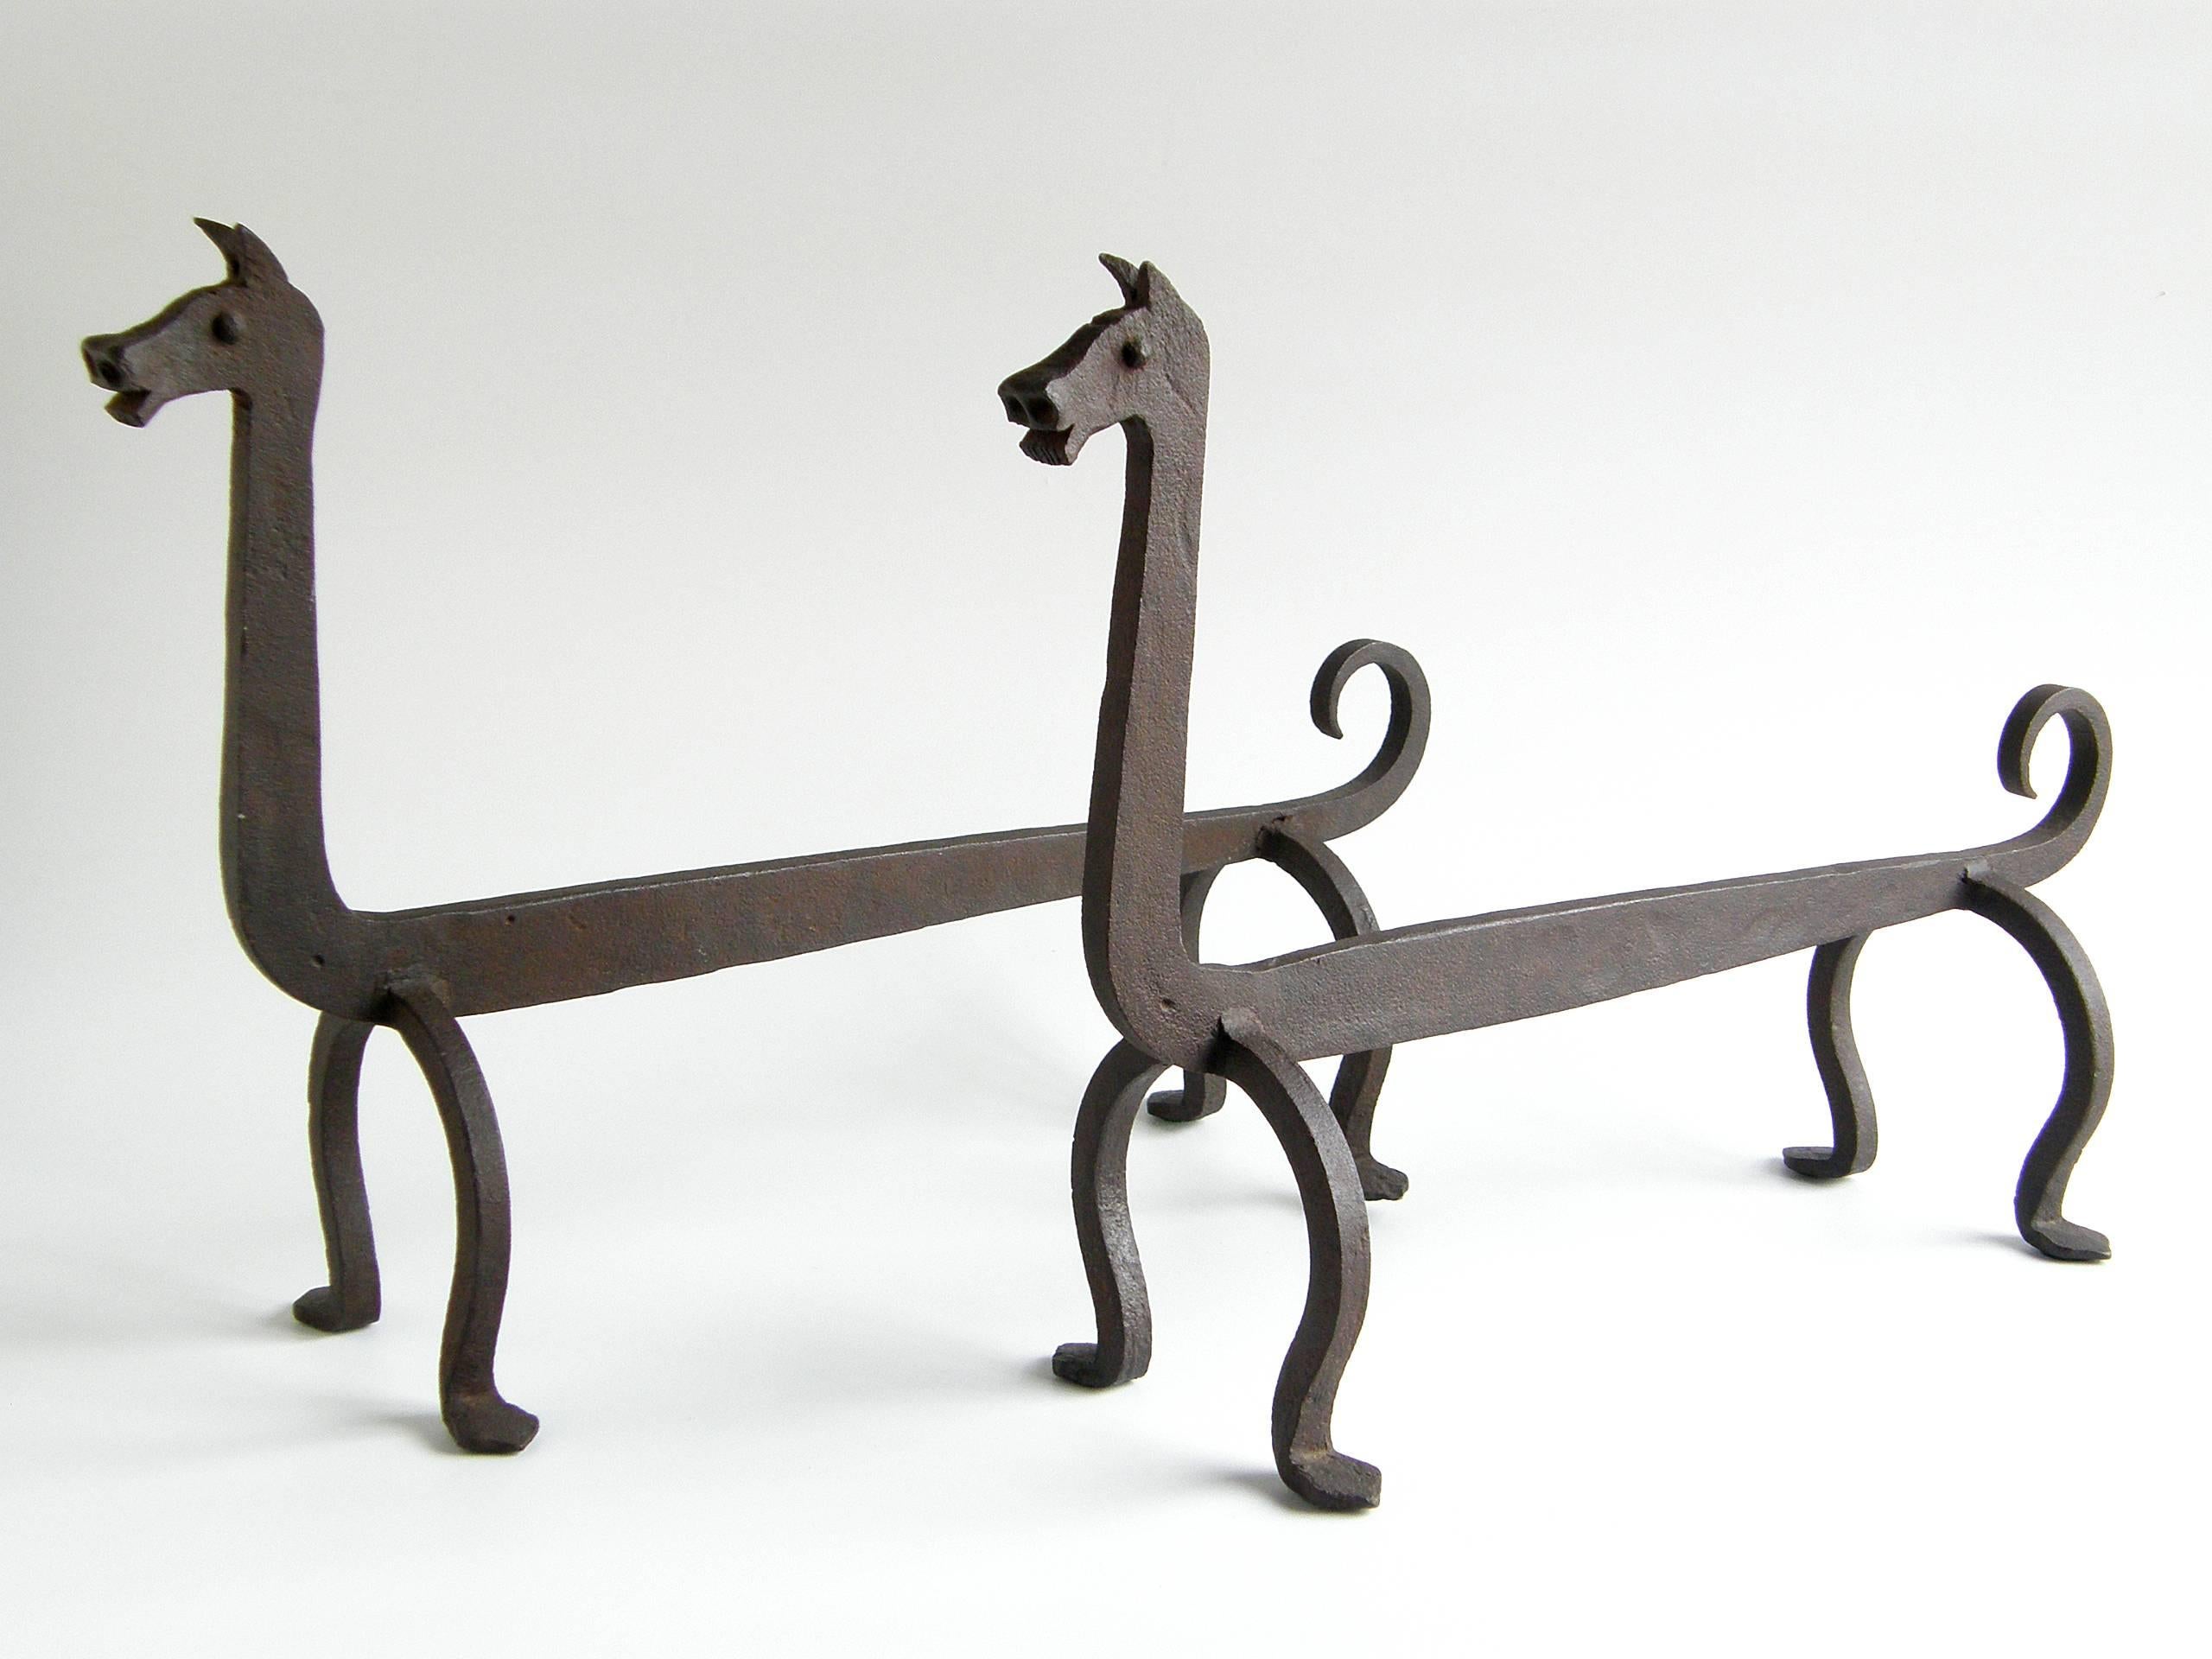 Stylized, hand-wrought iron log holders in the form of two dogs. They have a humorous quality with expressive faces, a wide-legged stance, long necks, and curled tails. They bring a playful tone to your fireplace.

Please contact us if you have